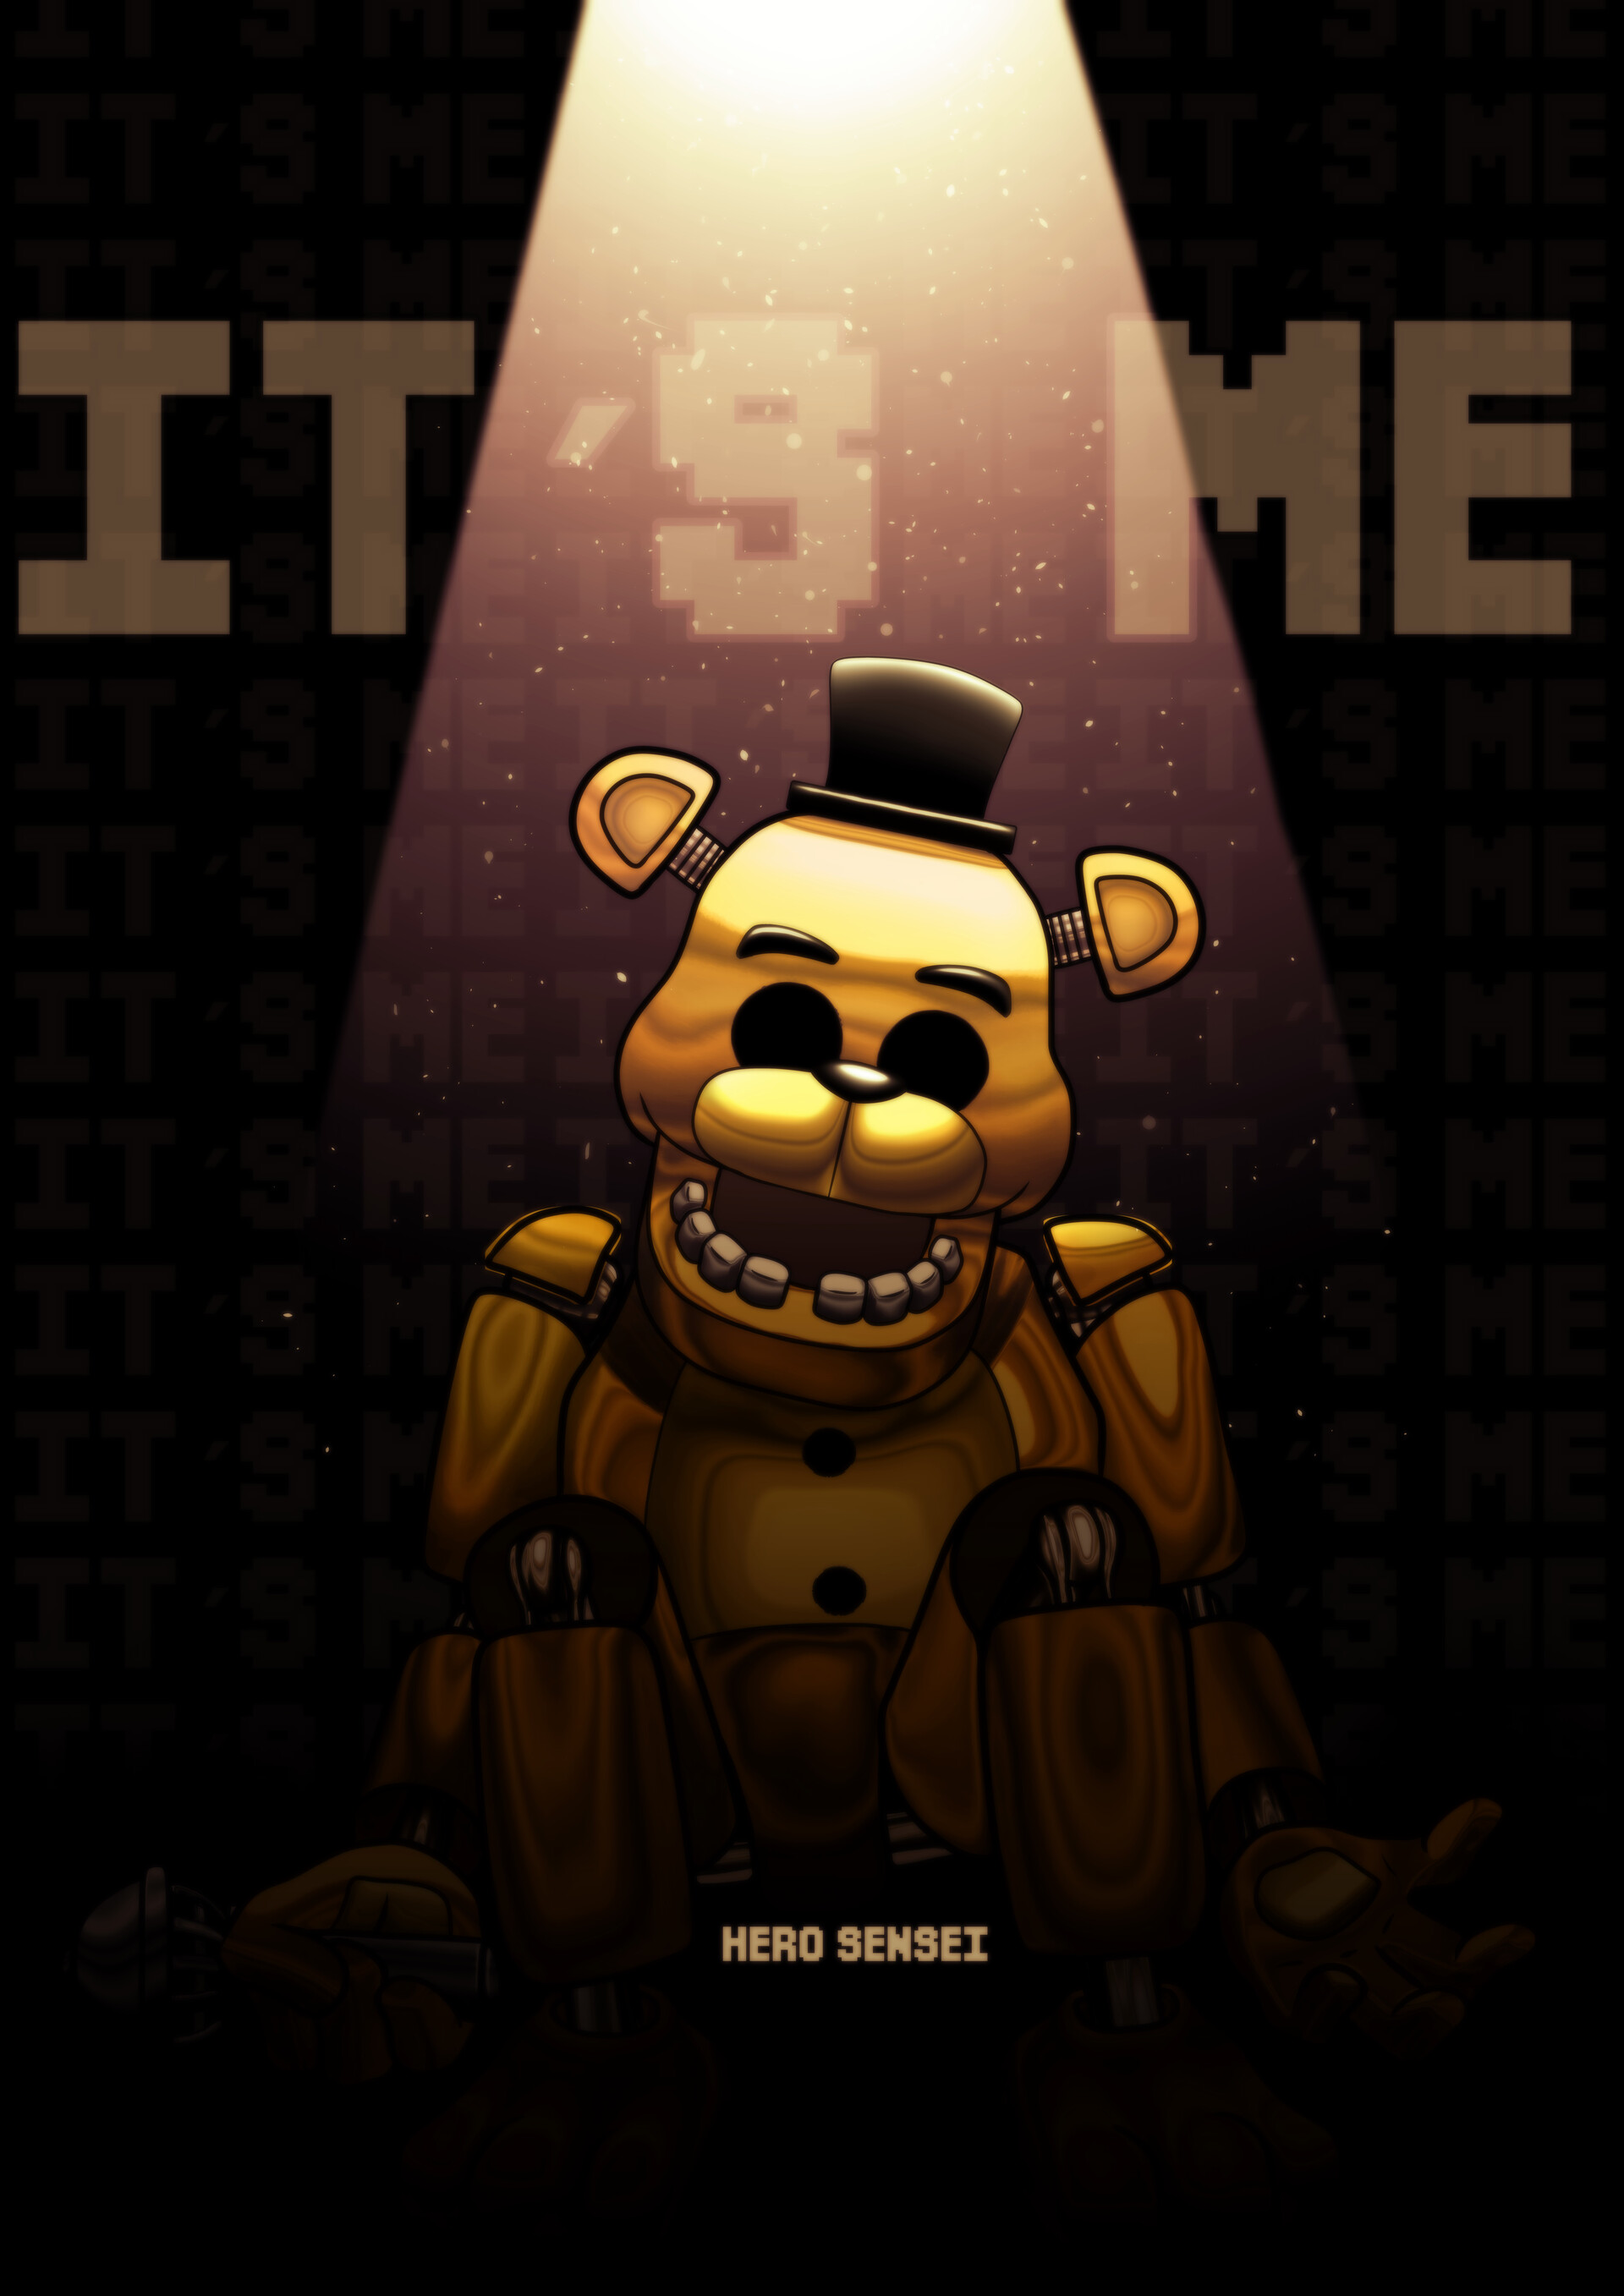 Purple Guy Golden Freddy - Cartoon Transparent PNG - 740x1124 - Free  Download on NicePNG